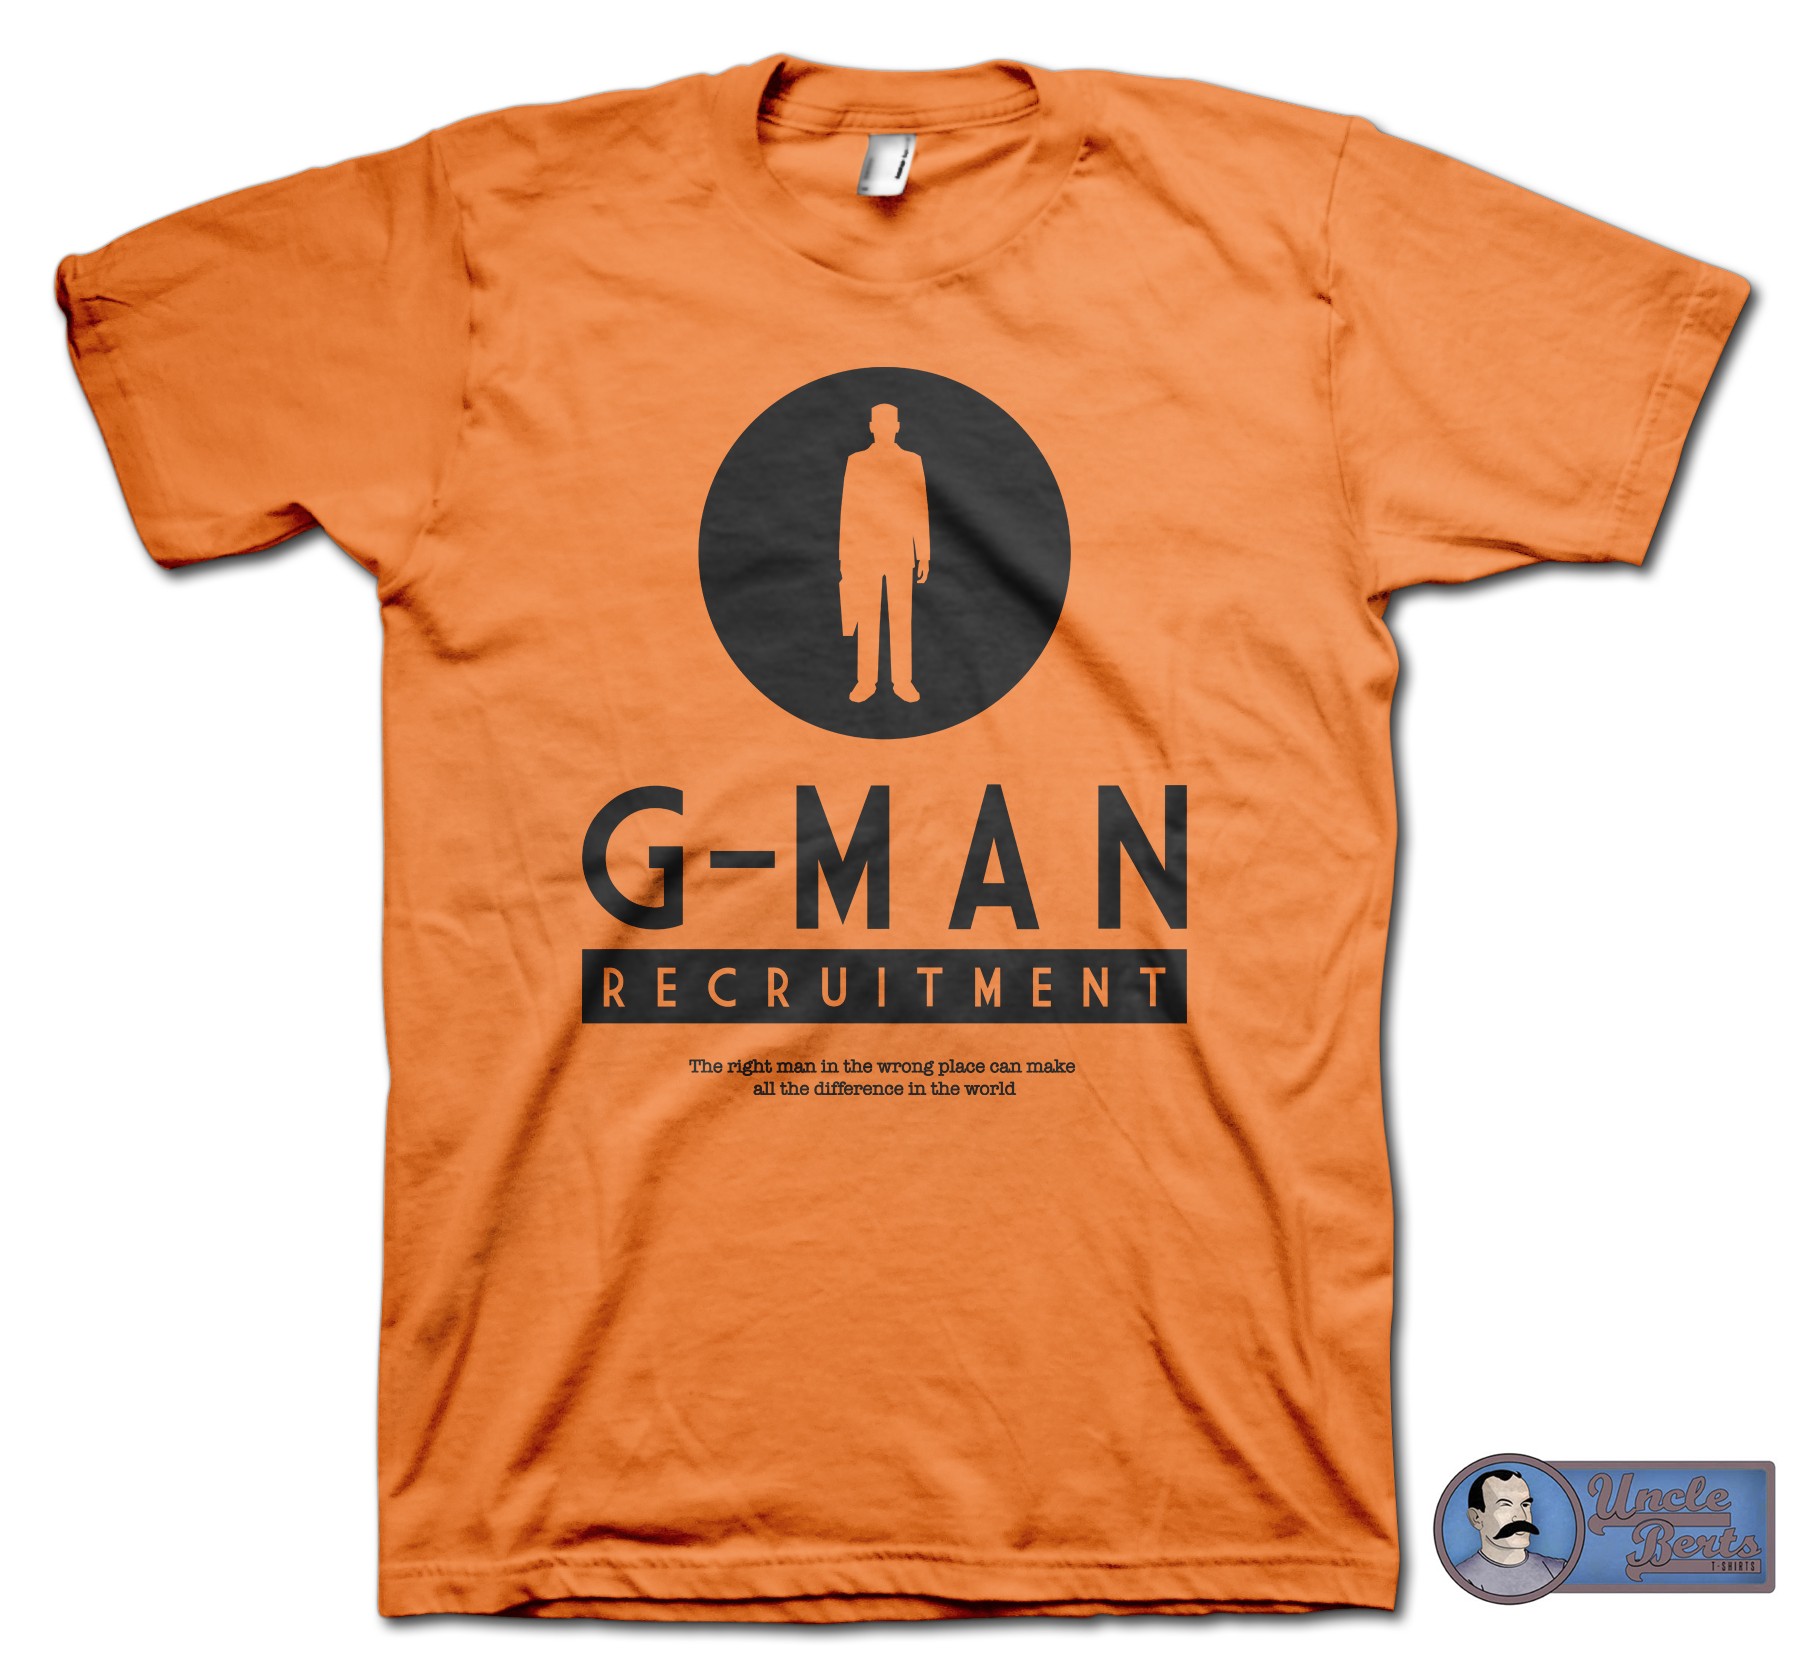 G-Man Recruitment T-Shirt - inspired by the Half Life series